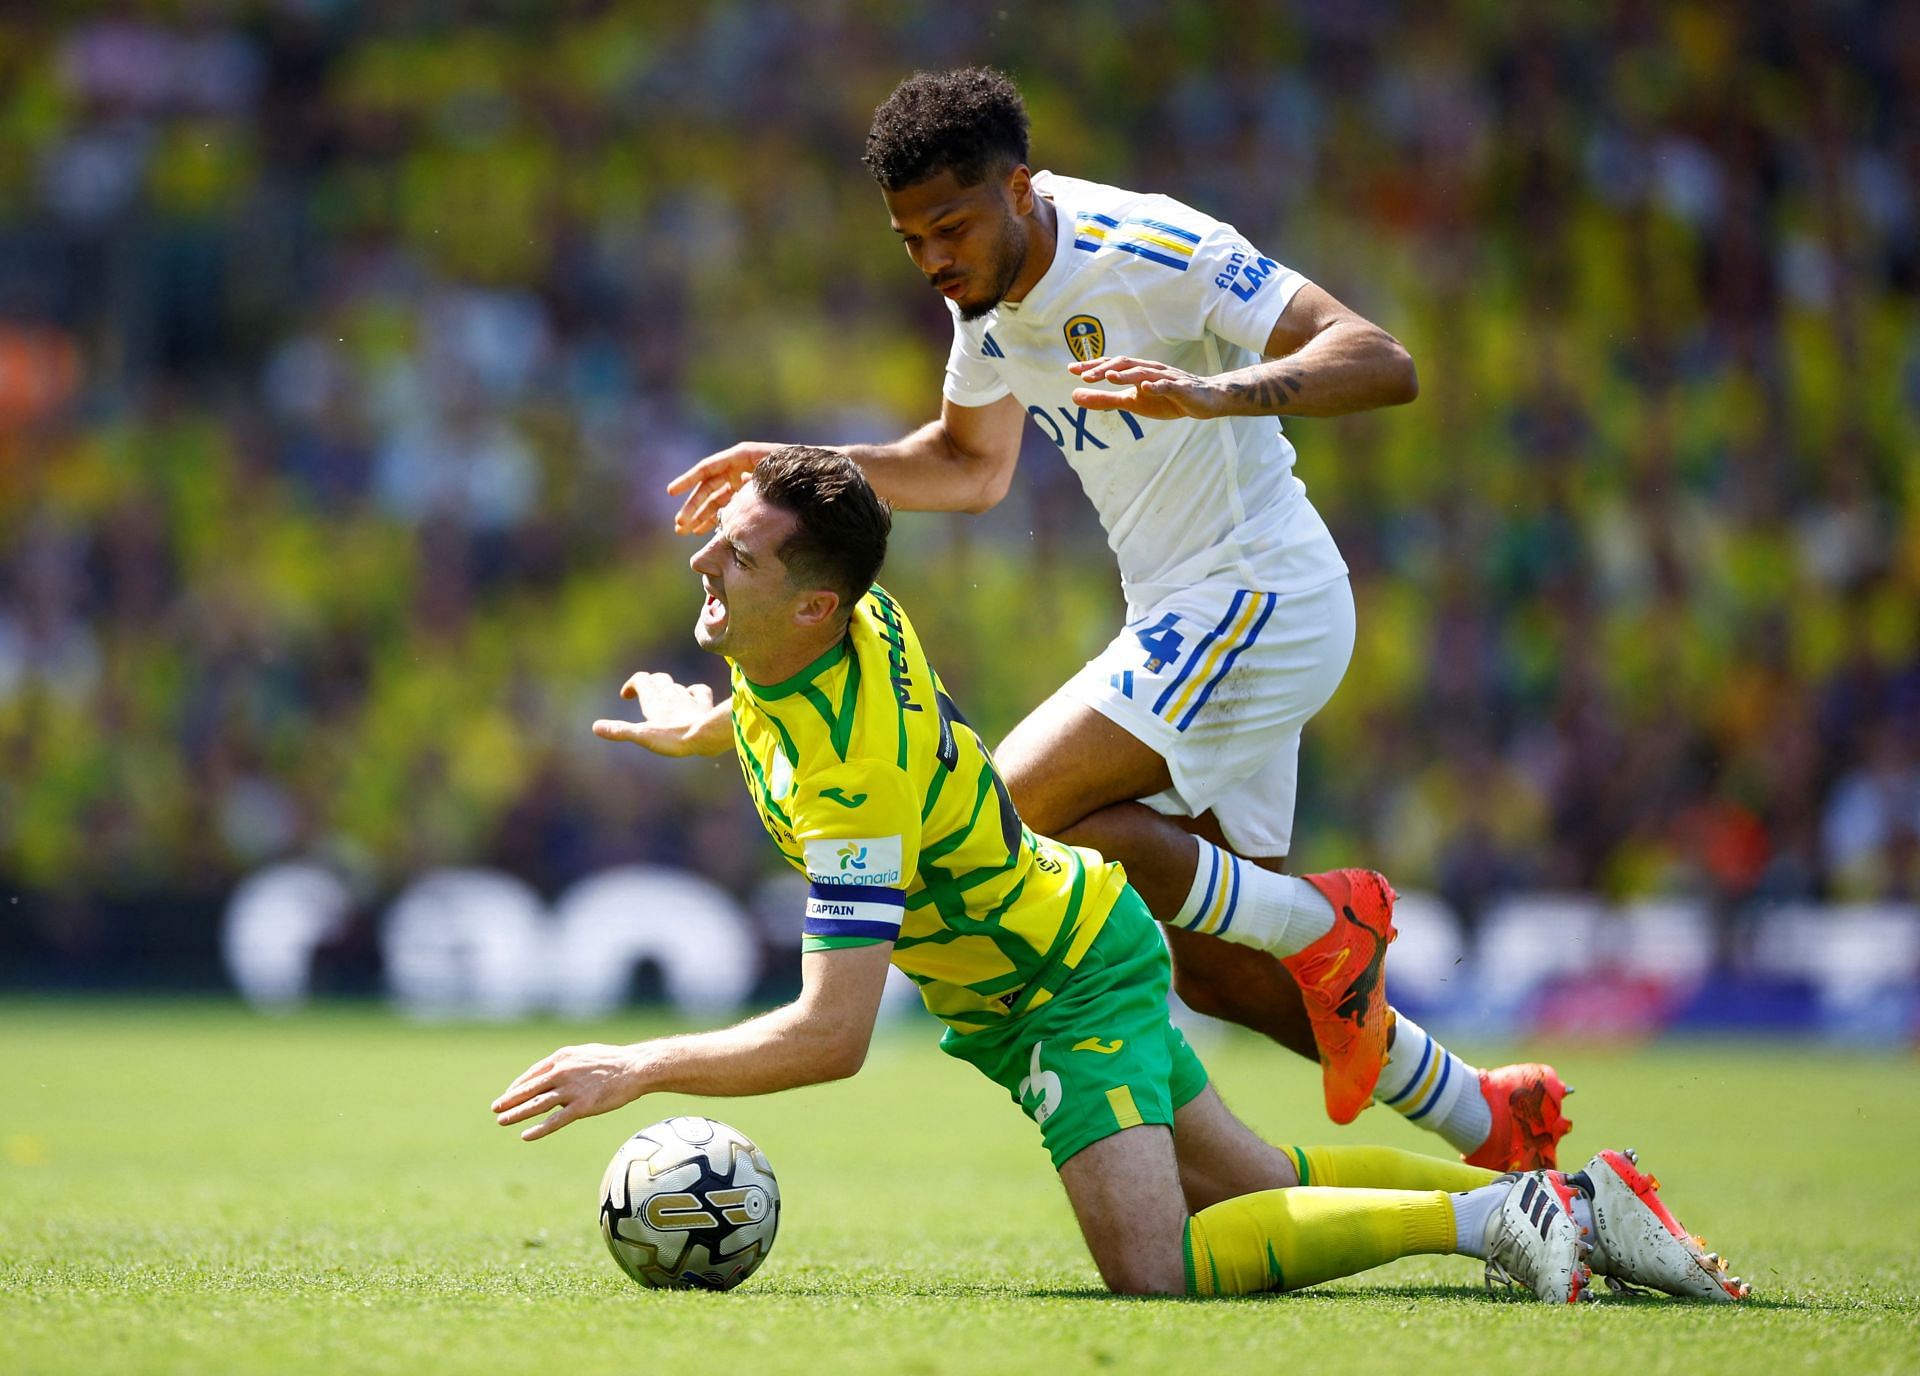 Norwich and Leeds drew 0-0 in the first leg